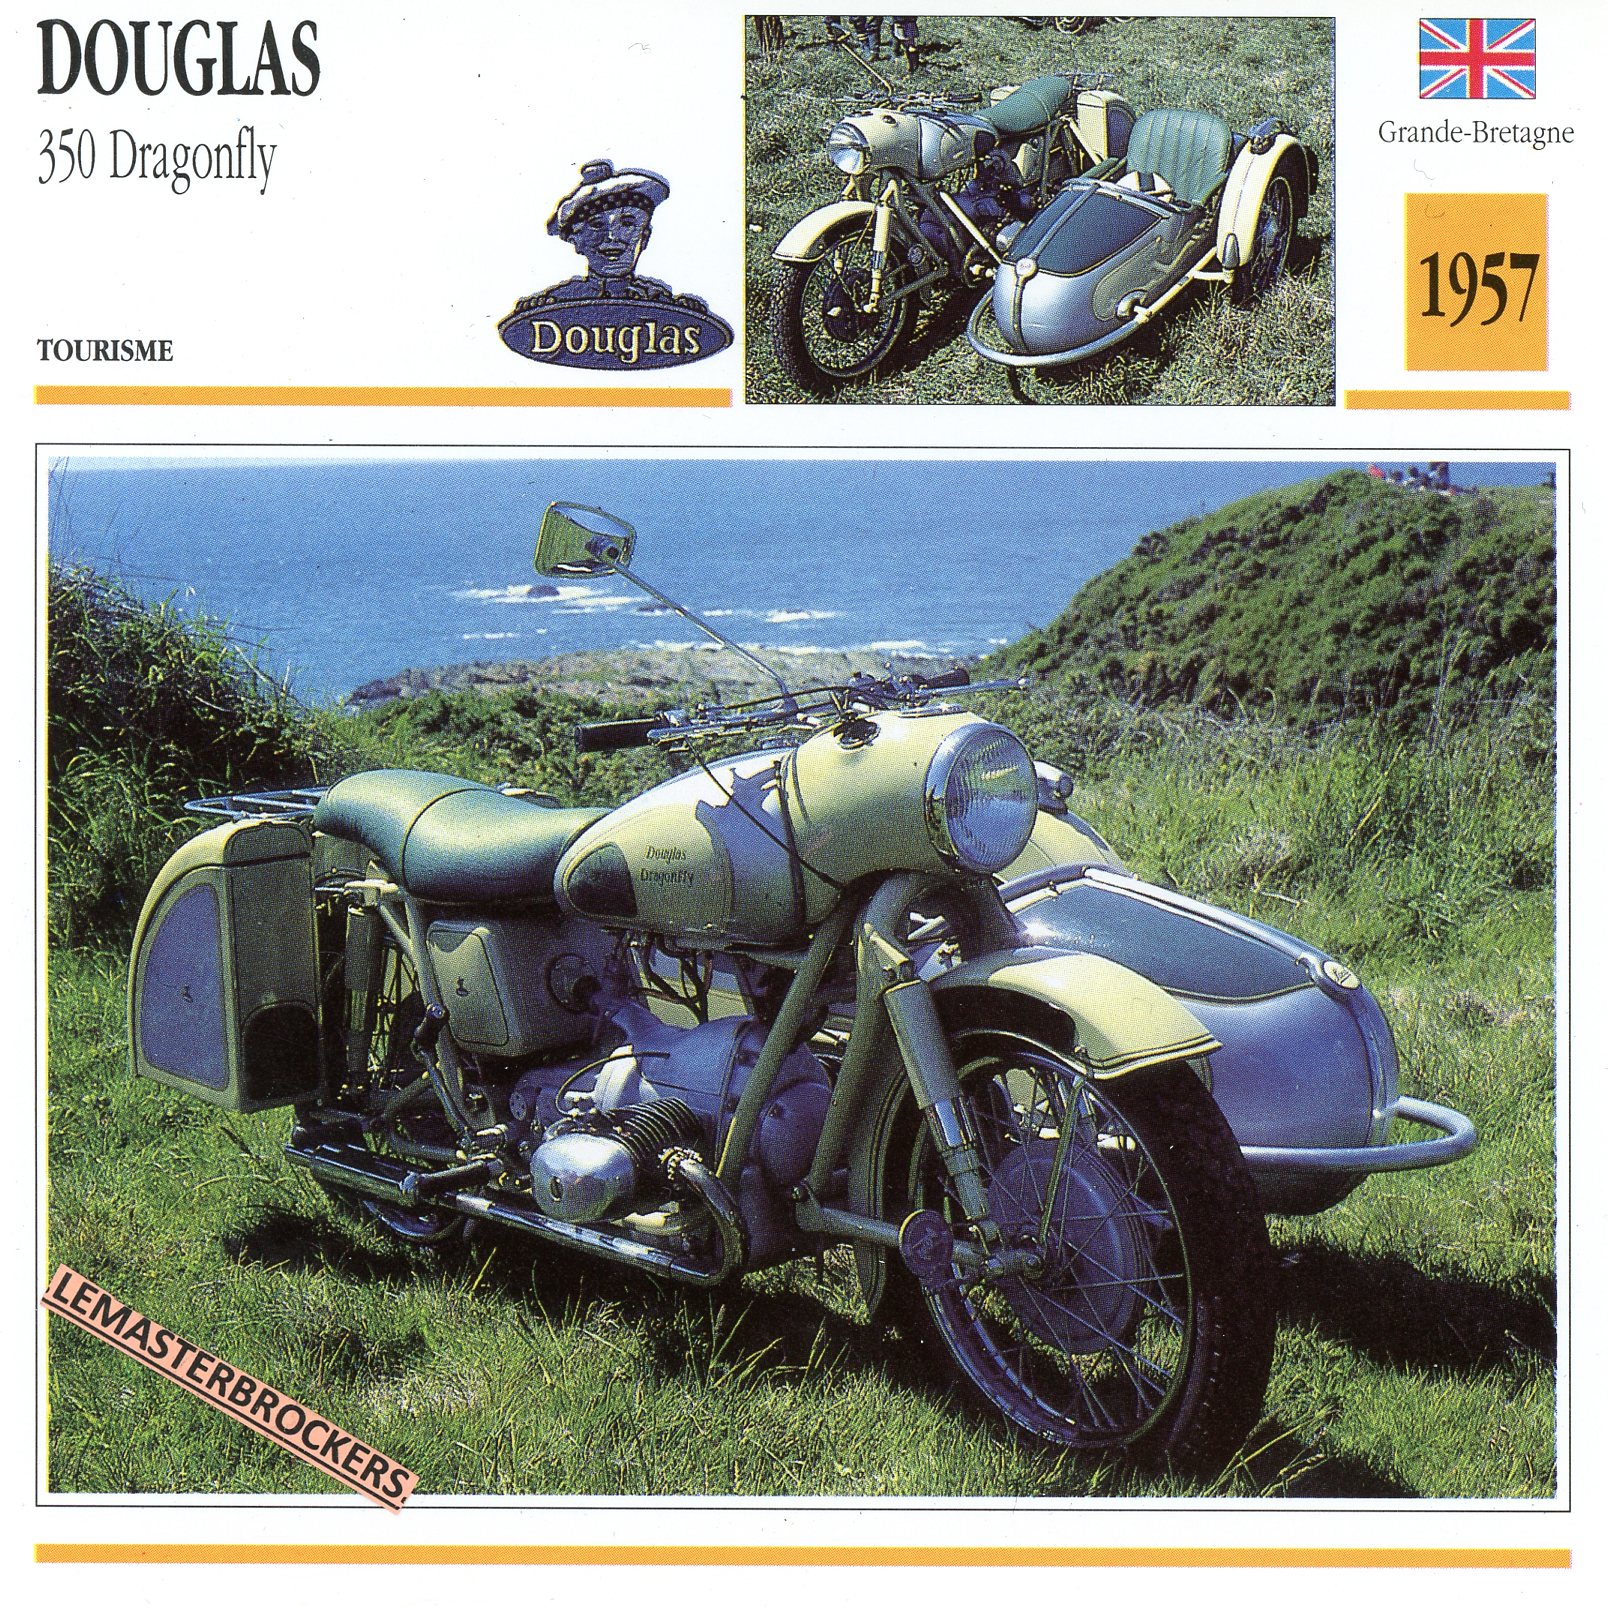 FICHE-MOTO-DOUGLAS-350-DRAGONFLY-1957-LEMASTERBROCKERS-CARD-MOTORCYCLE-SIDE-CAR